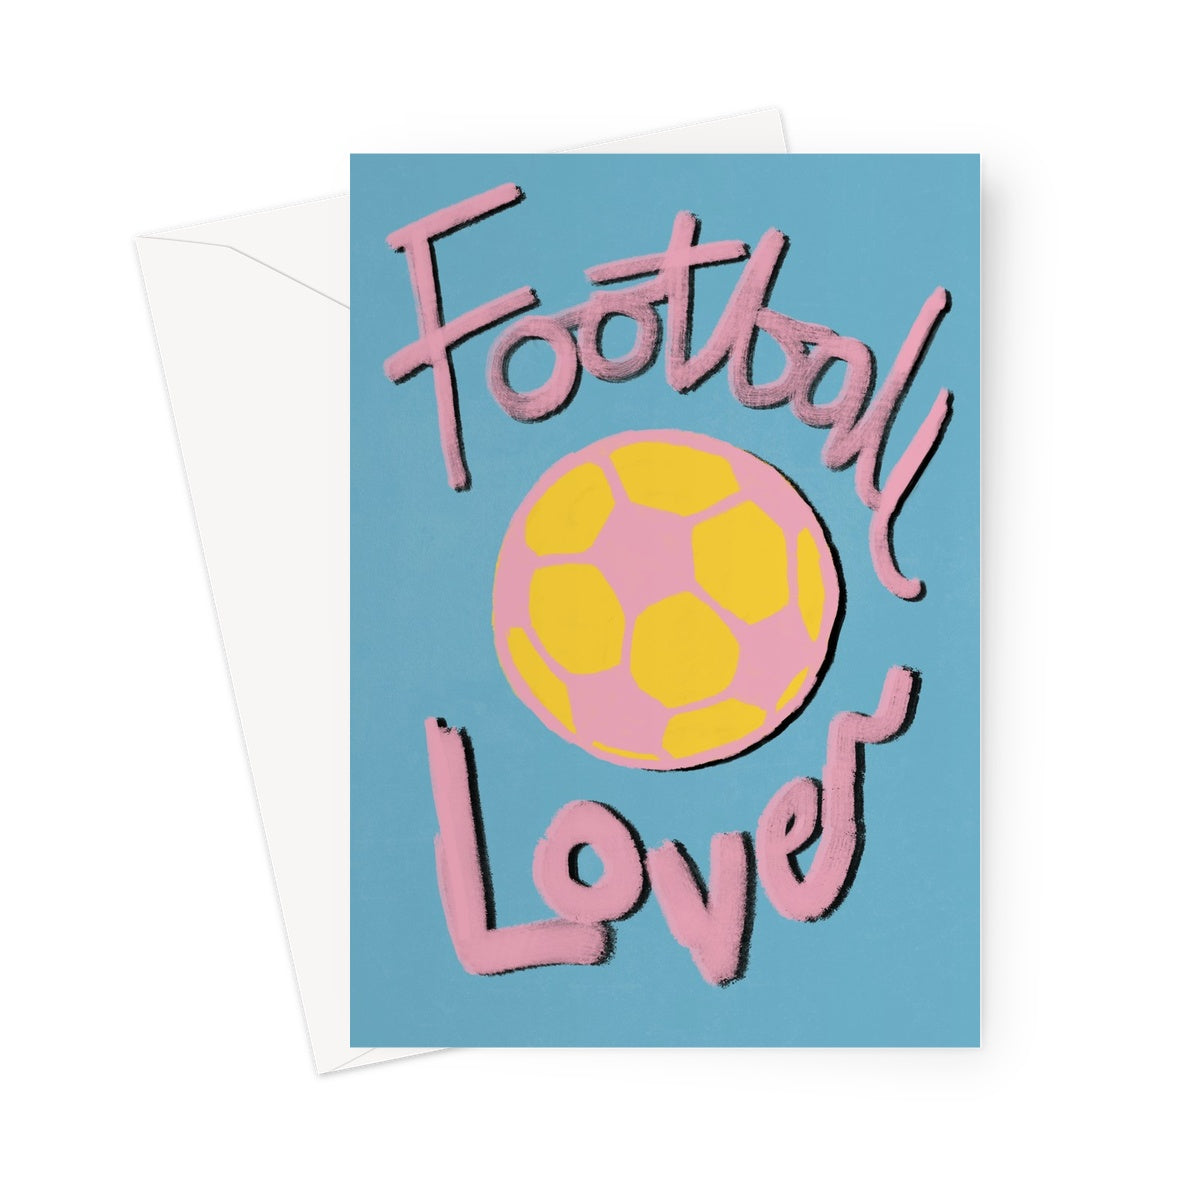 Football Lover Print - Blue, Yellow, Pink Greeting Card